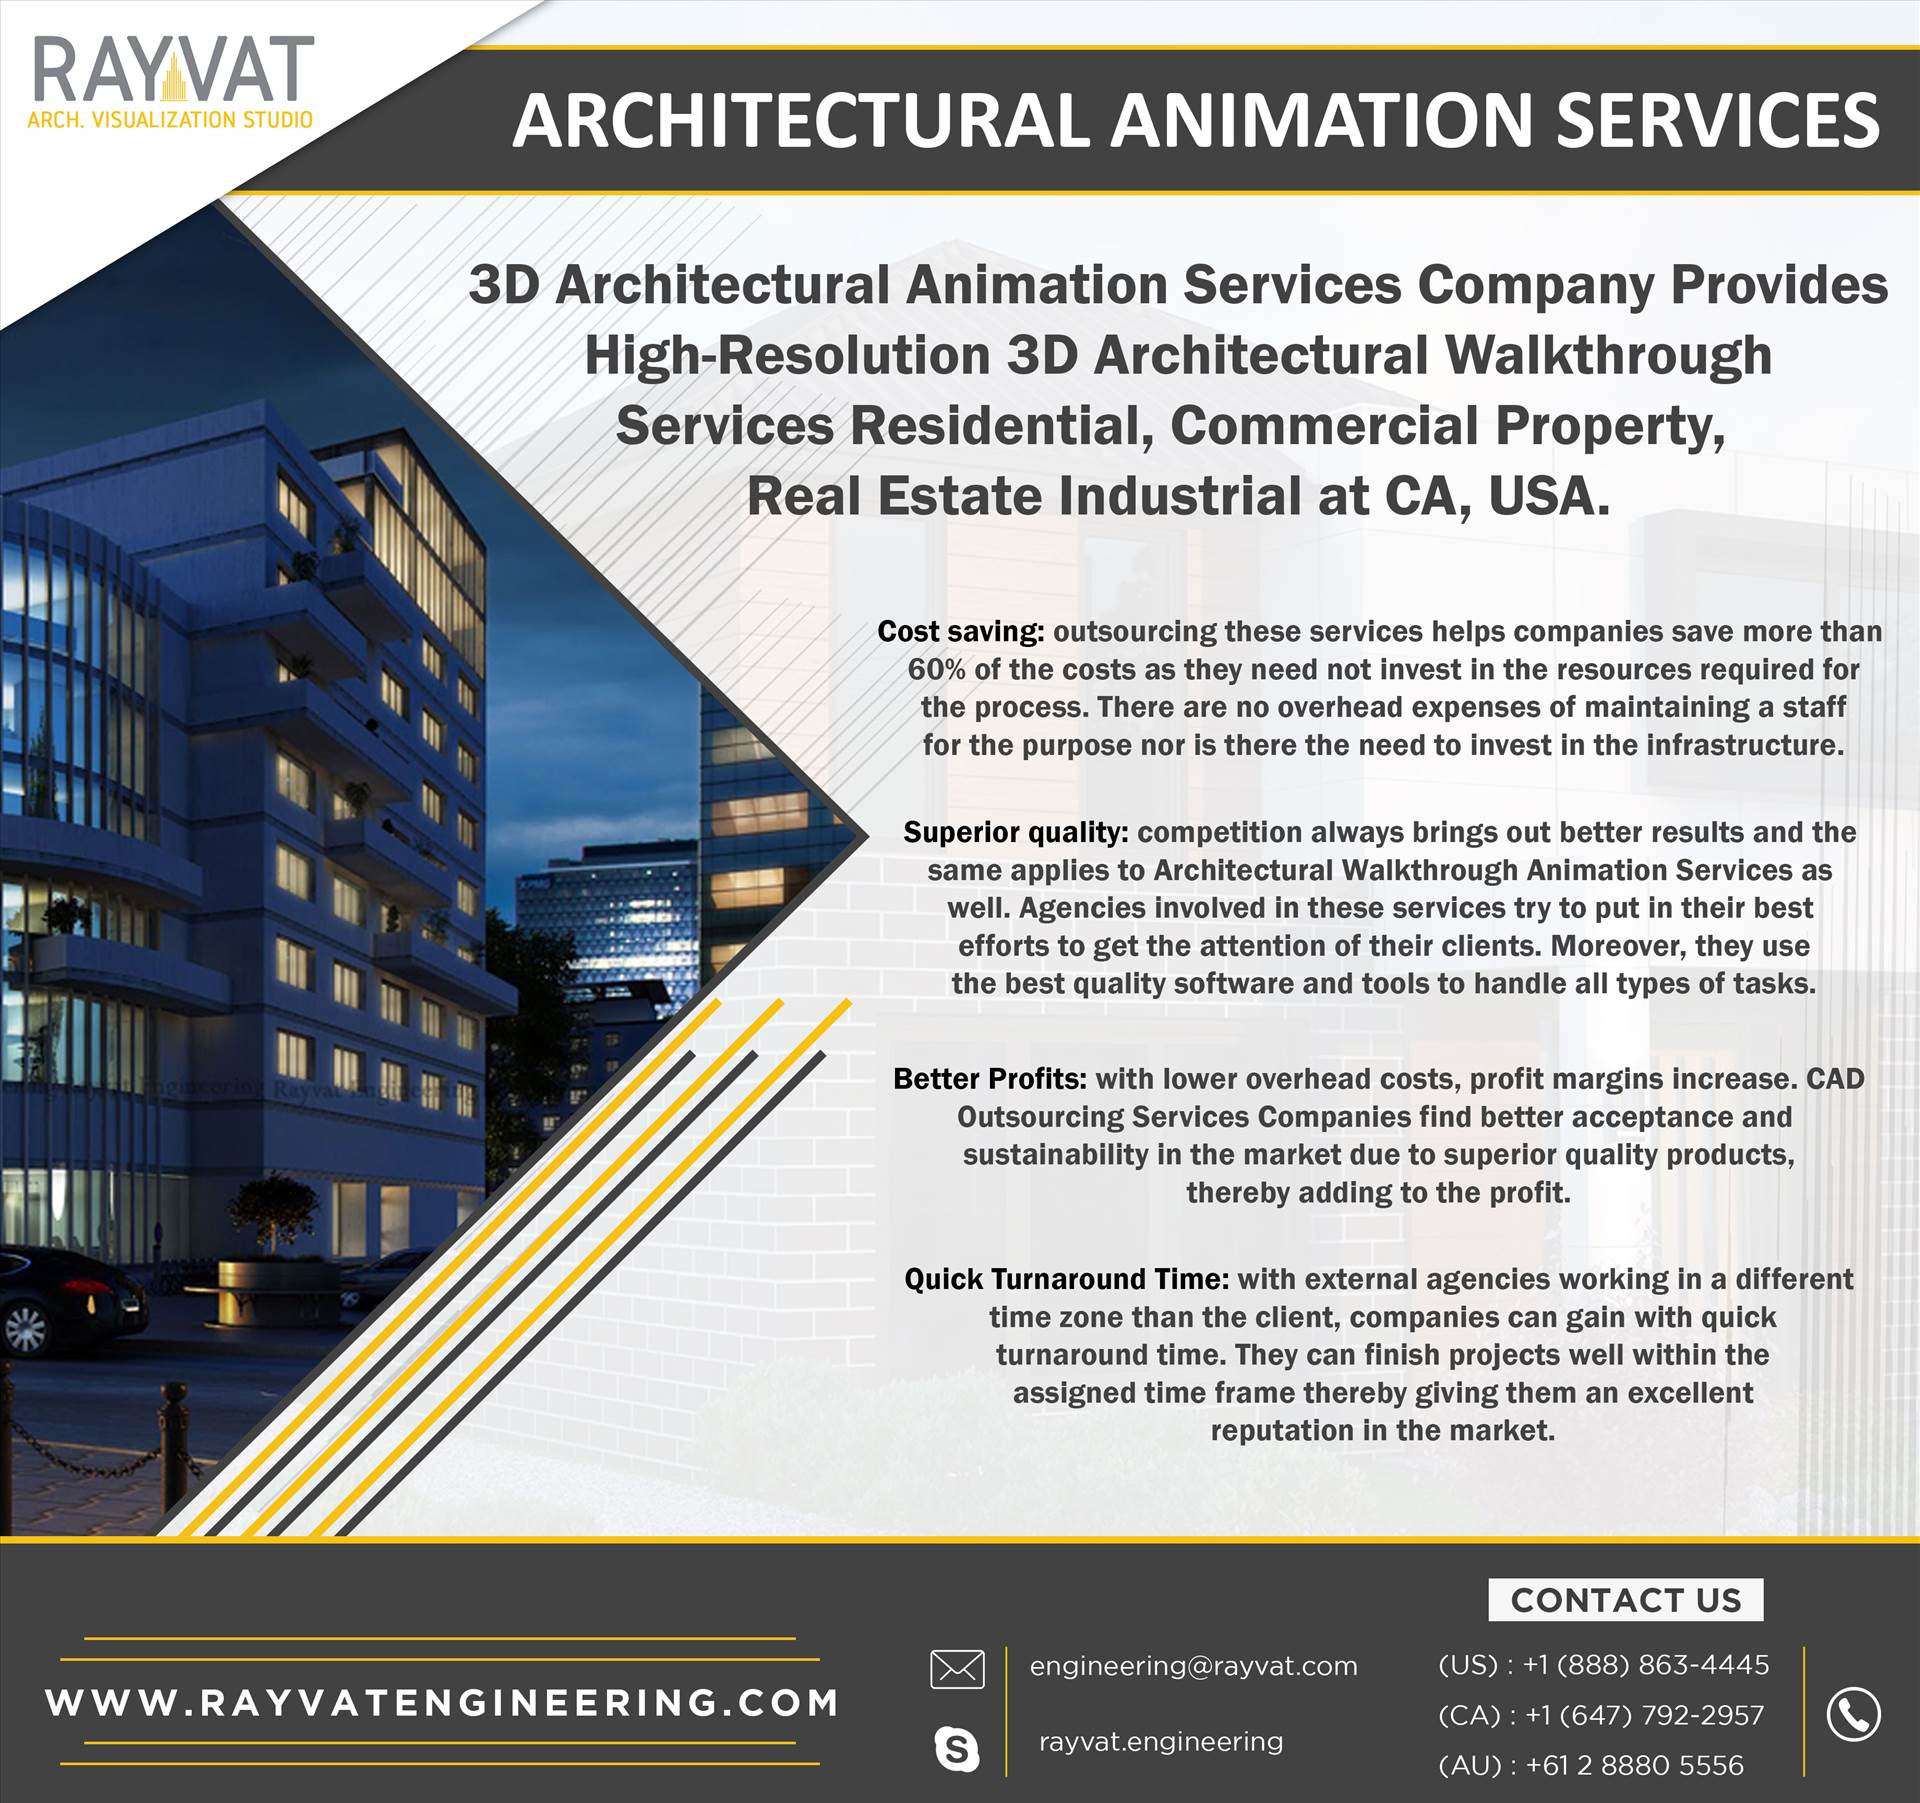 Architectural-Animation-Services-.jpg  by Rayvatengineering